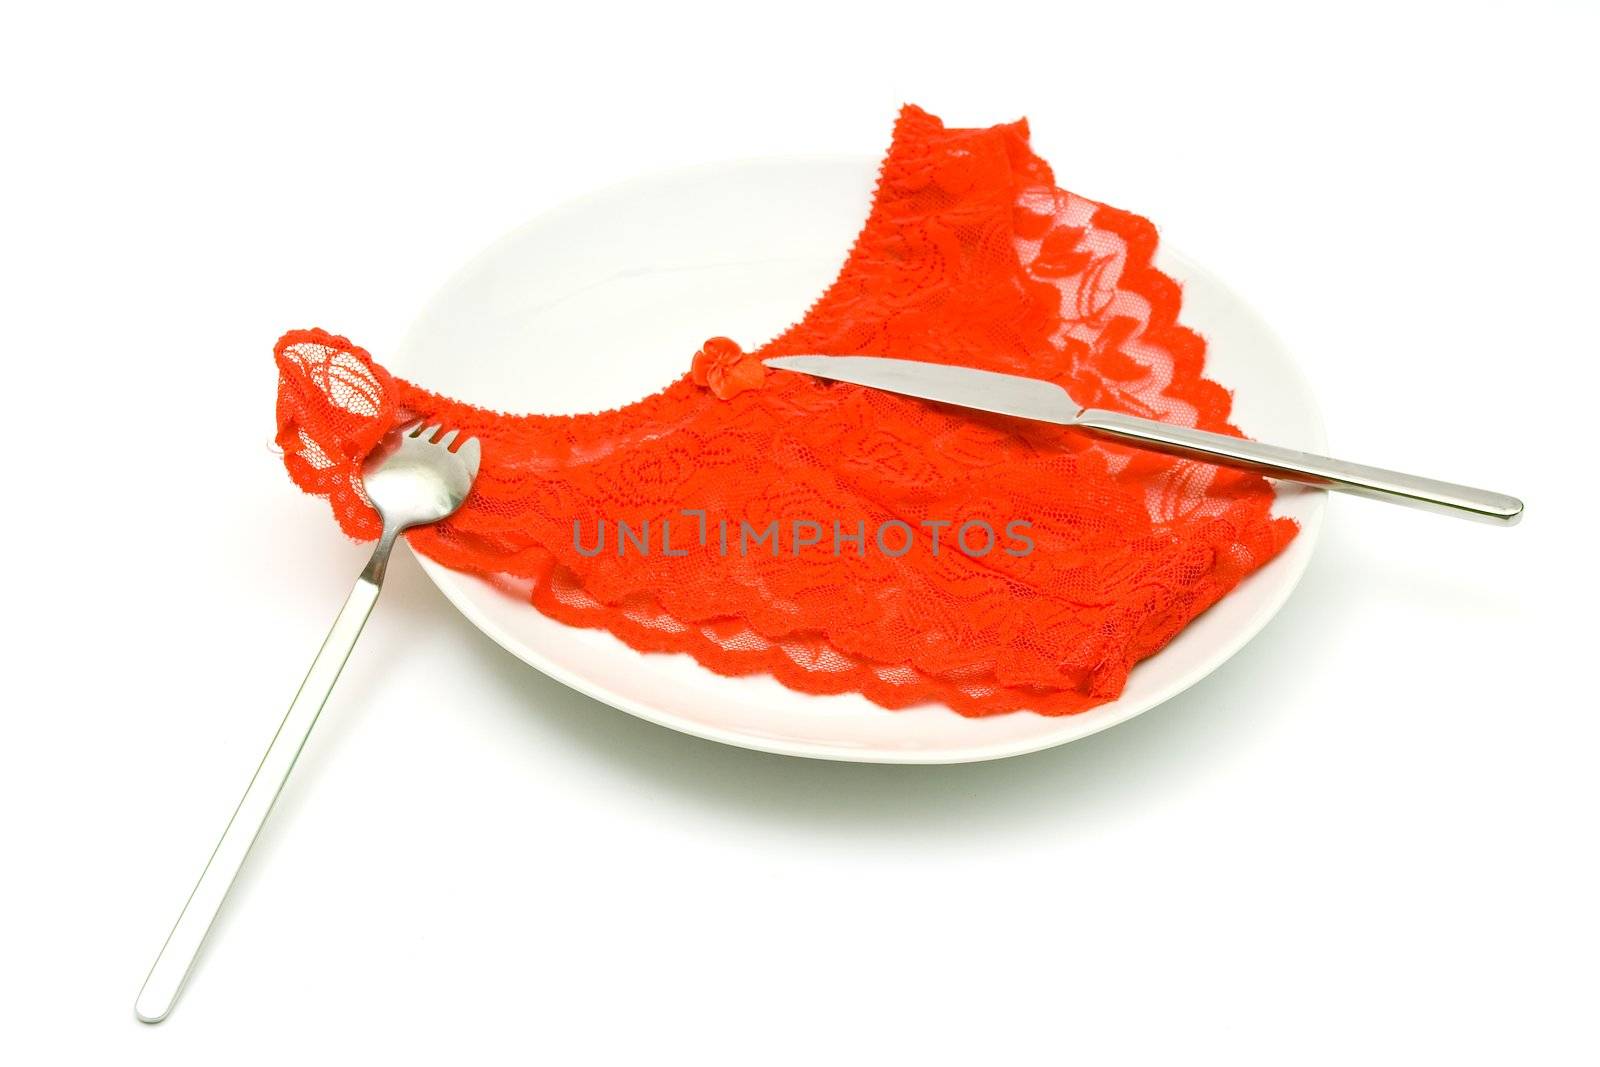 Red Women's elegant and sexy panties, lying on a white dish